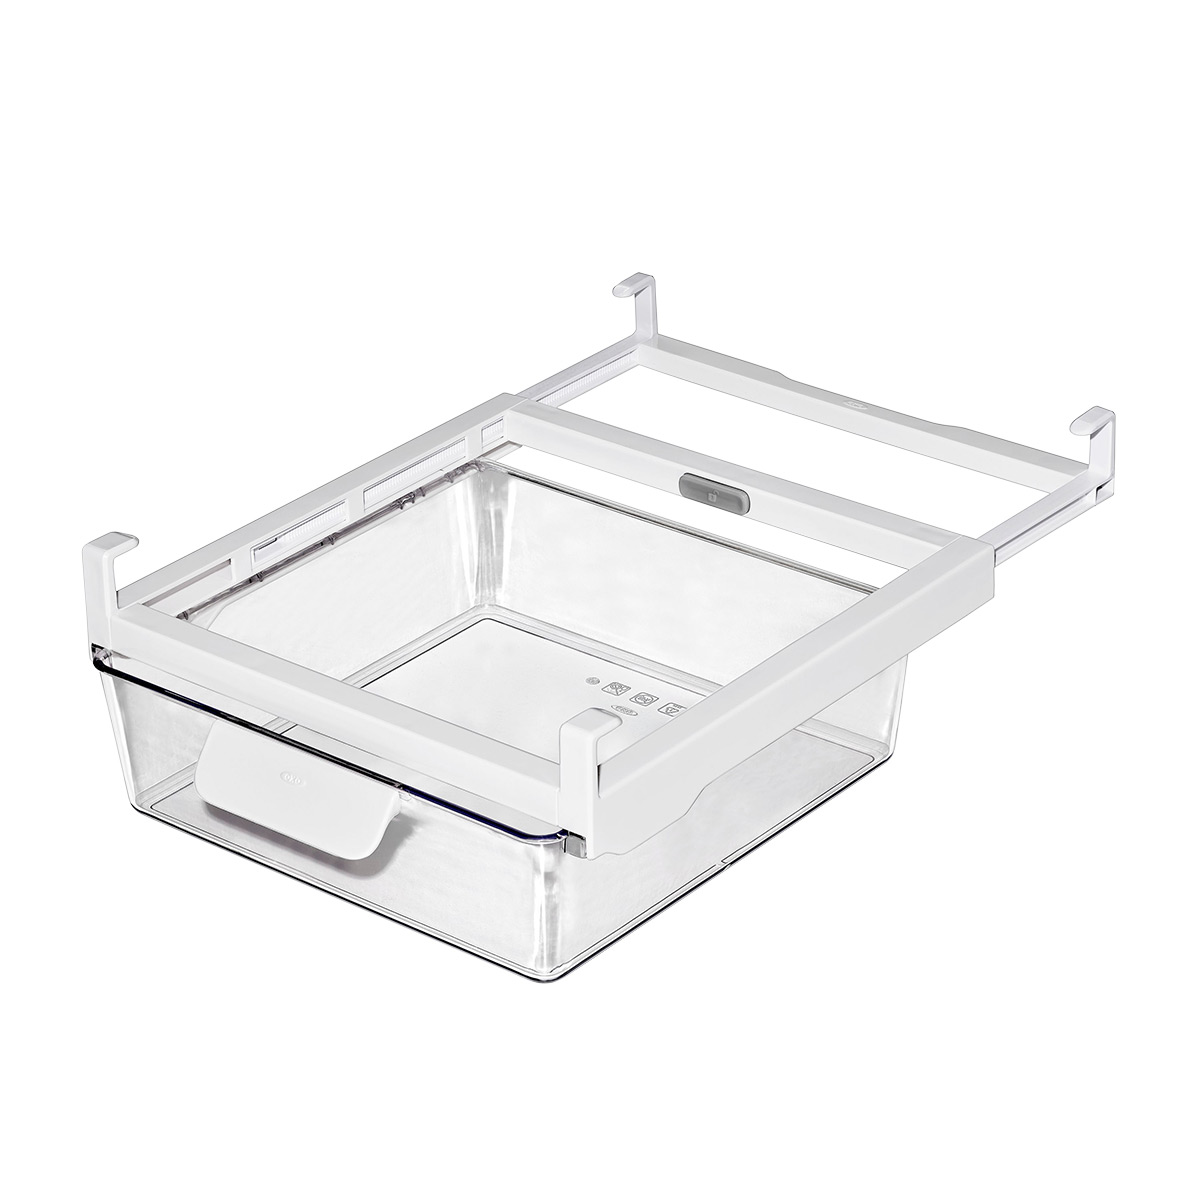 https://www.containerstore.com/catalogimages/474004/10092335-oxo-10in-shelf-drawer-ven6.jpg